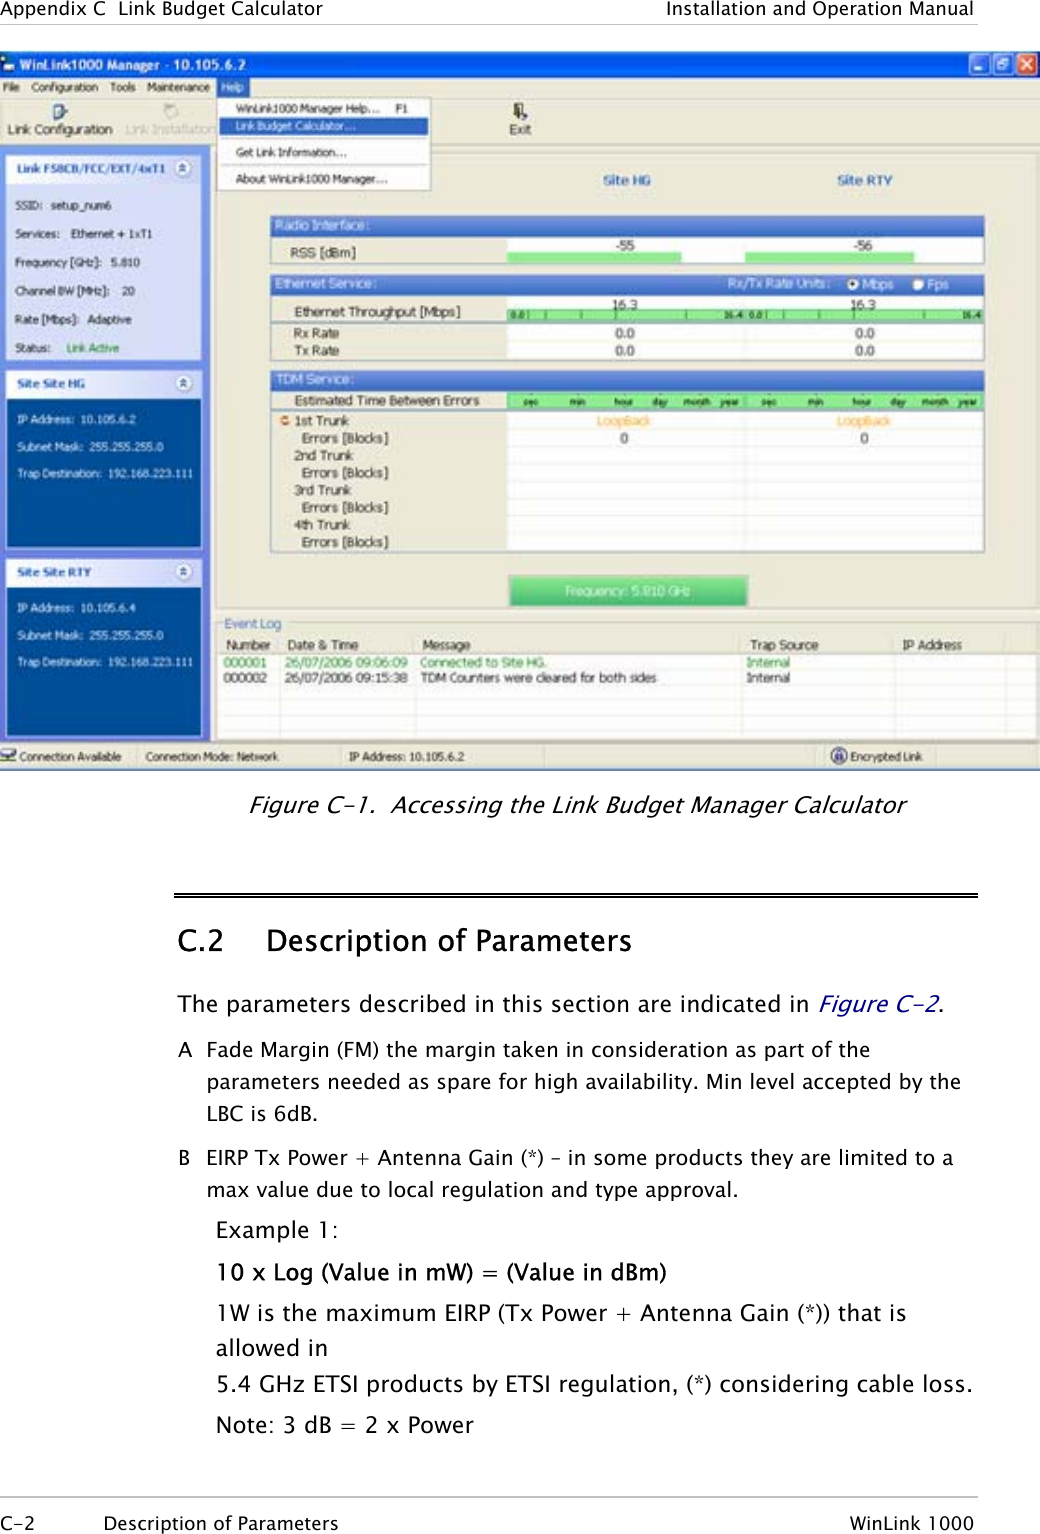 Appendix  C  Link Budget Calculator  Installation and Operation Manual  Figure  C-1.  Accessing the Link Budget Manager Calculator C.2 Description of Parameters The parameters described in this section are indicated in Figure  C-2. A  Fade Margin (FM) the margin taken in consideration as part of the parameters needed as spare for high availability. Min level accepted by the LBC is 6dB. B  EIRP Tx Power + Antenna Gain (*) – in some products they are limited to a max value due to local regulation and type approval. Example 1: 10 x Log (Value in mW) = (Value in dBm) 1W is the maximum EIRP (Tx Power + Antenna Gain (*)) that is allowed in  5.4 GHz ETSI products by ETSI regulation, (*) considering cable loss. Note: 3 dB = 2 x Power  C-2 Description of Parameters  WinLink 1000  